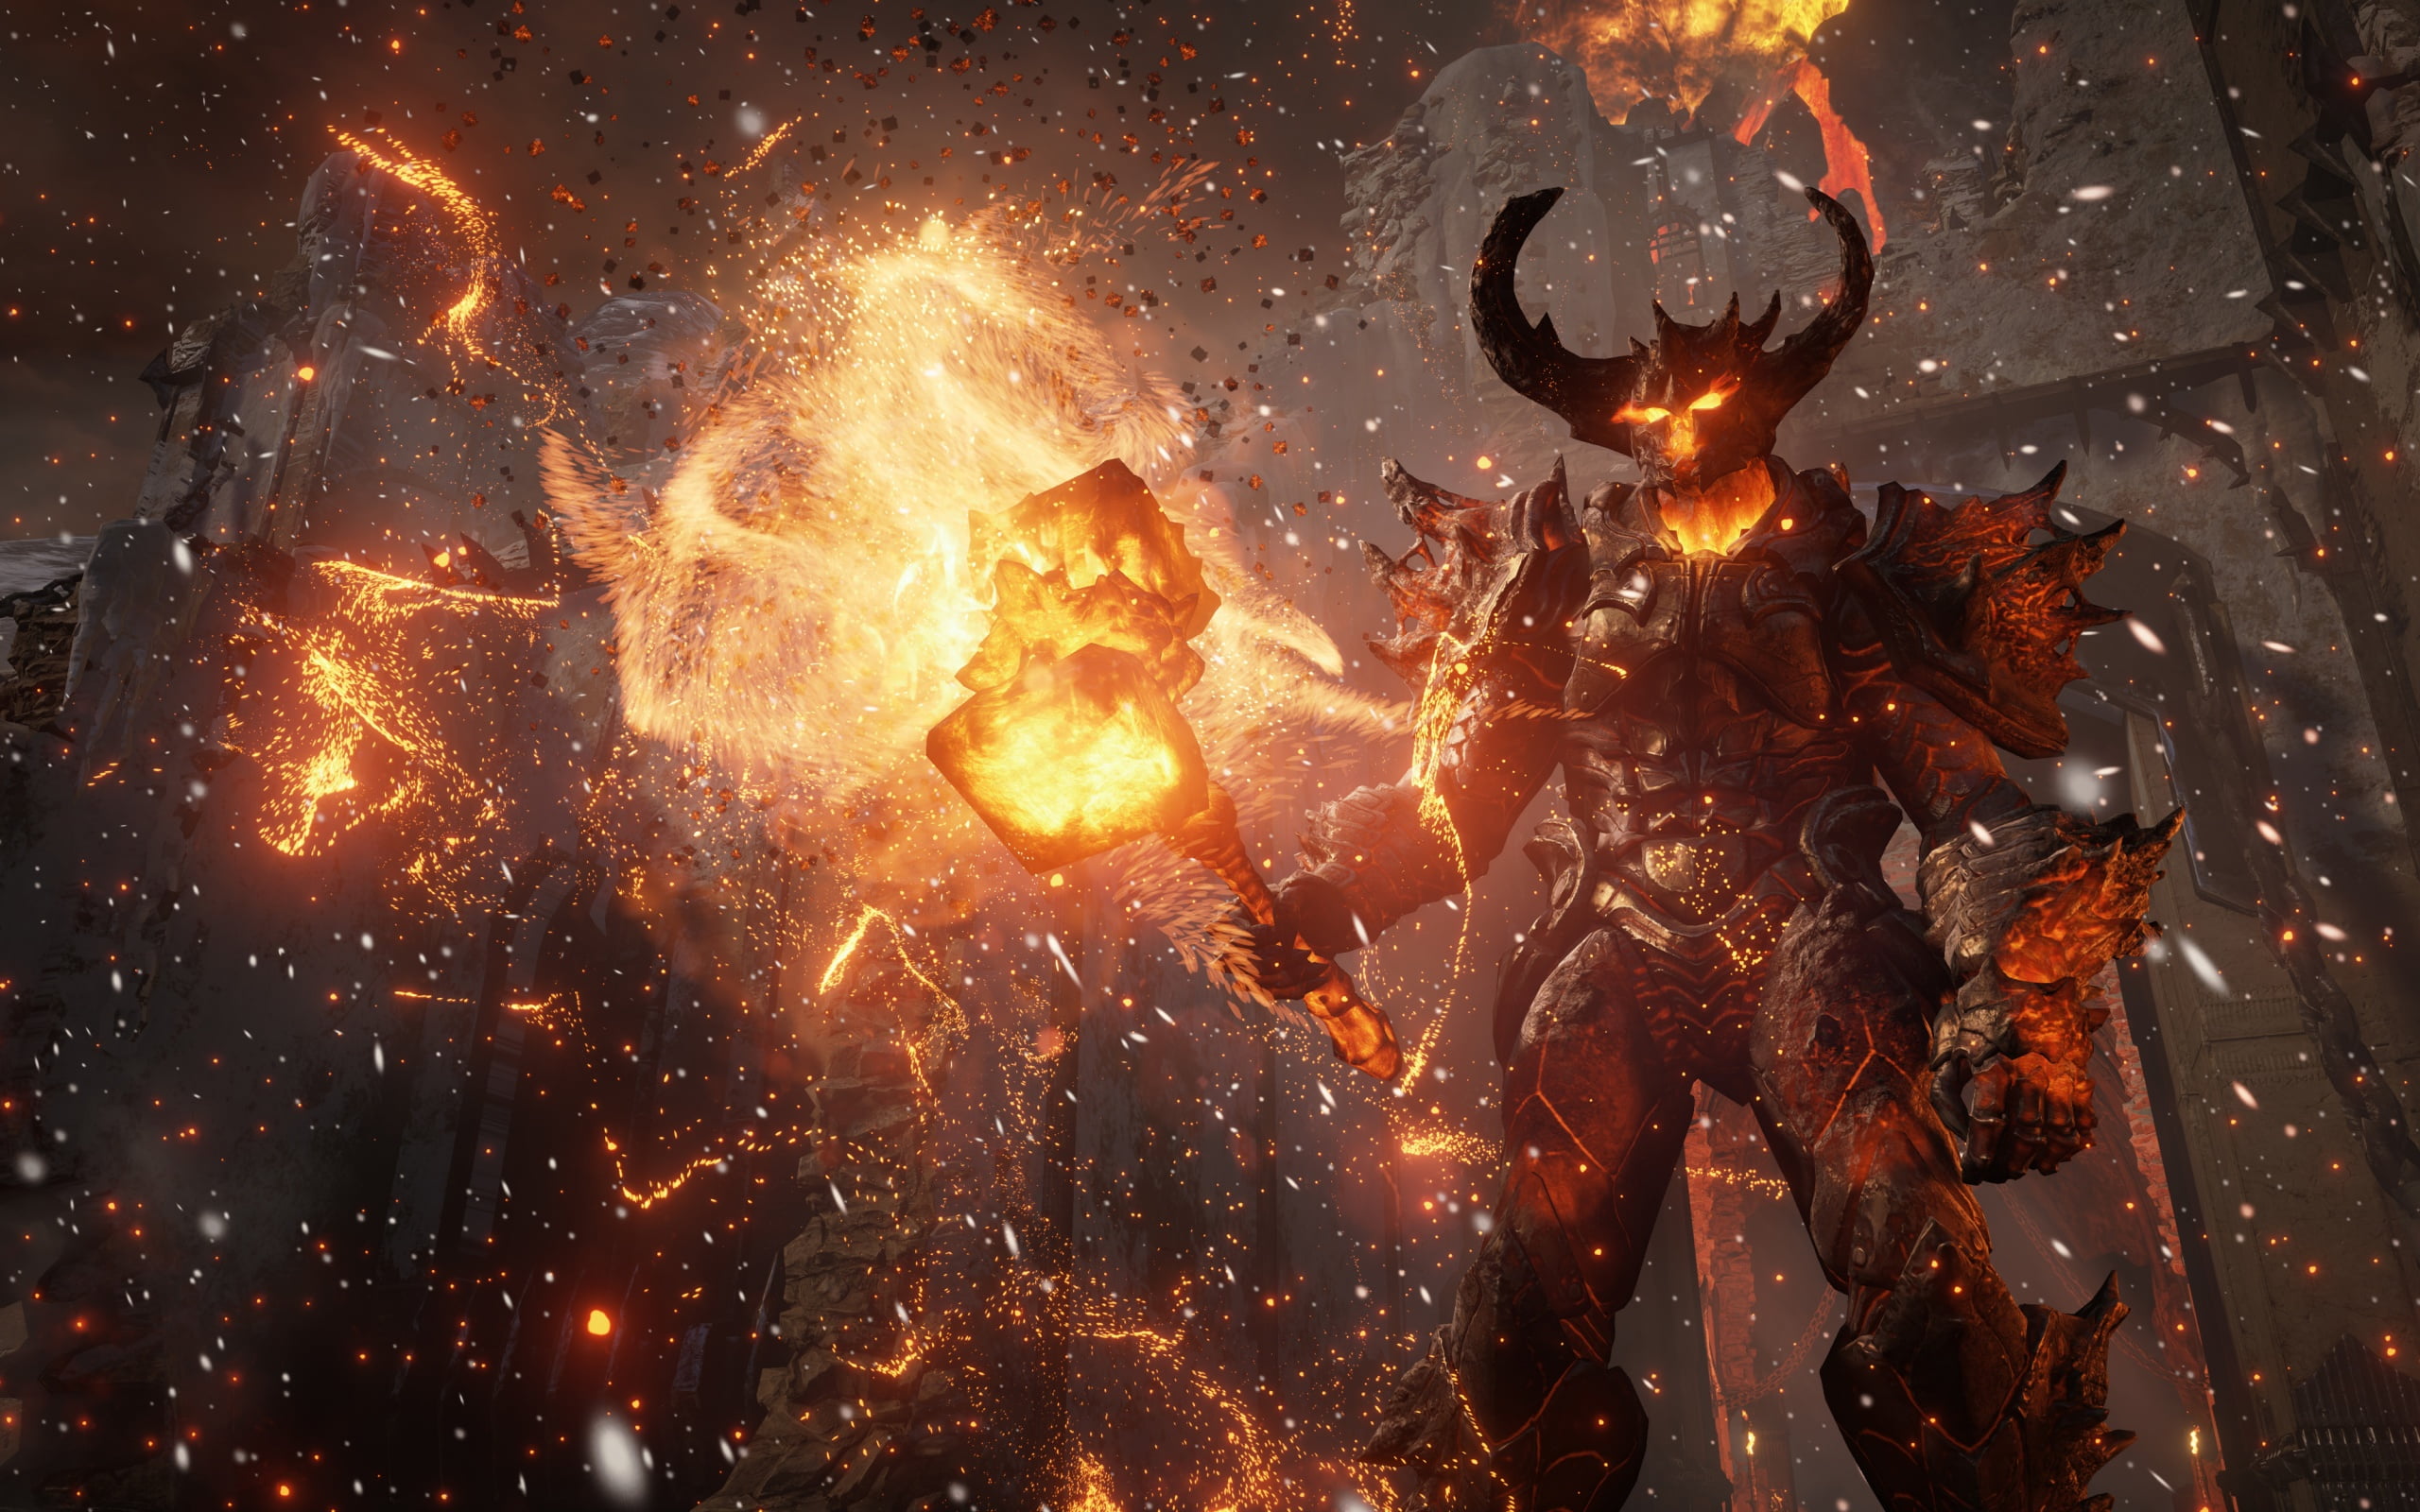 Unreal Engine 4 Game, black character with flame wallpaper, Games